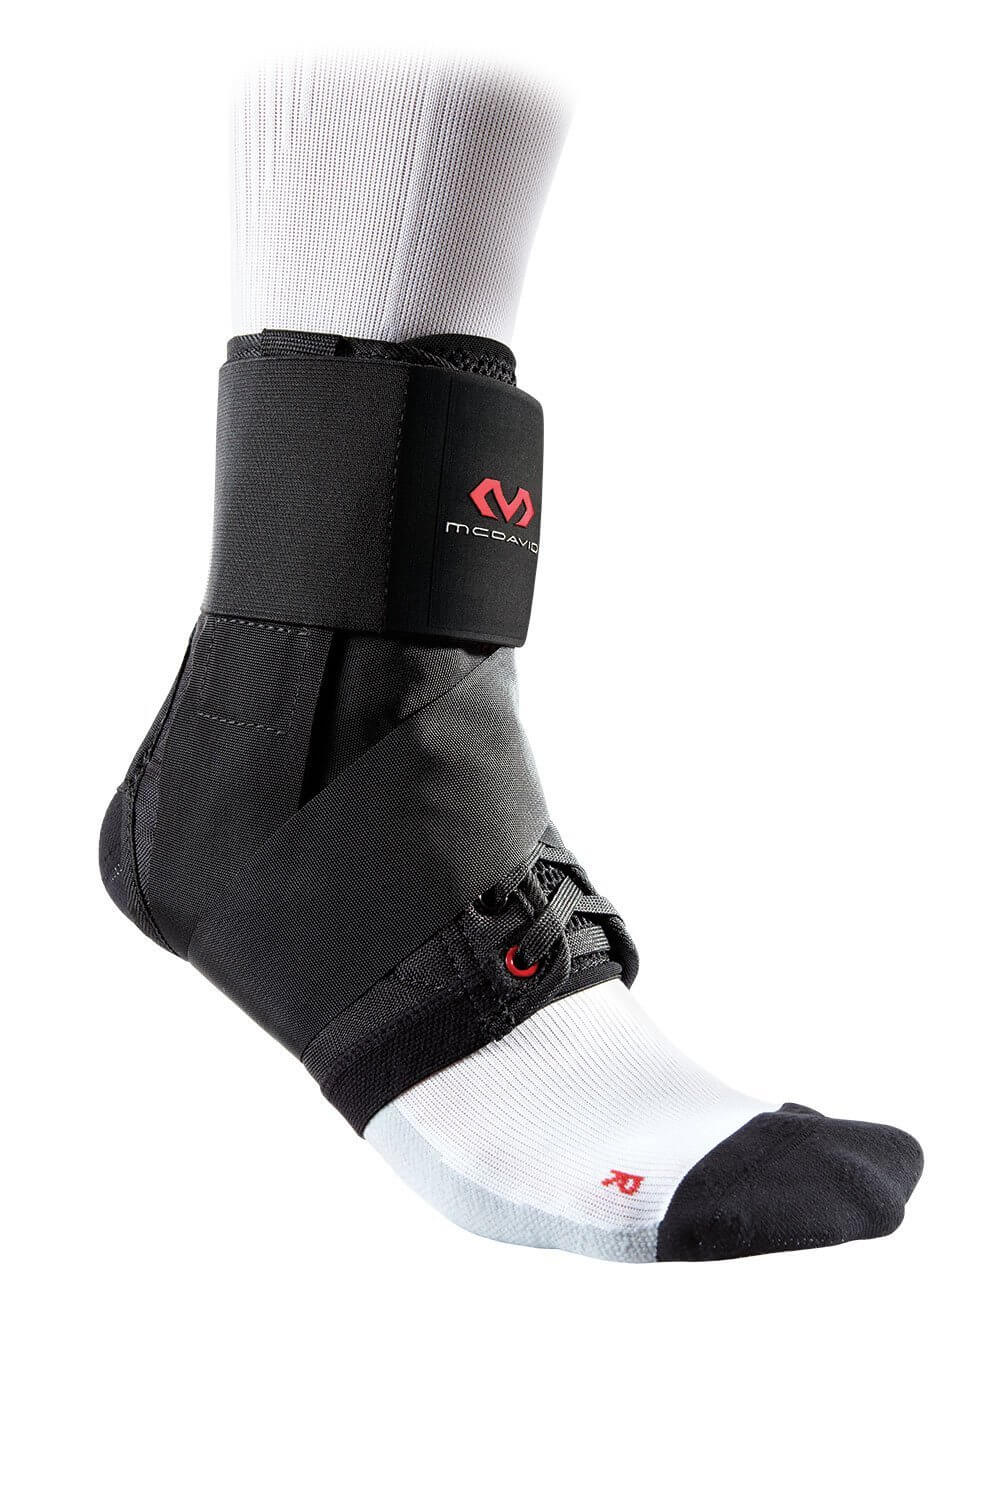 Featured Image for McDavid Ankle Brace with Straps, Maximum Support, Comfortable Compression & Breathable Design